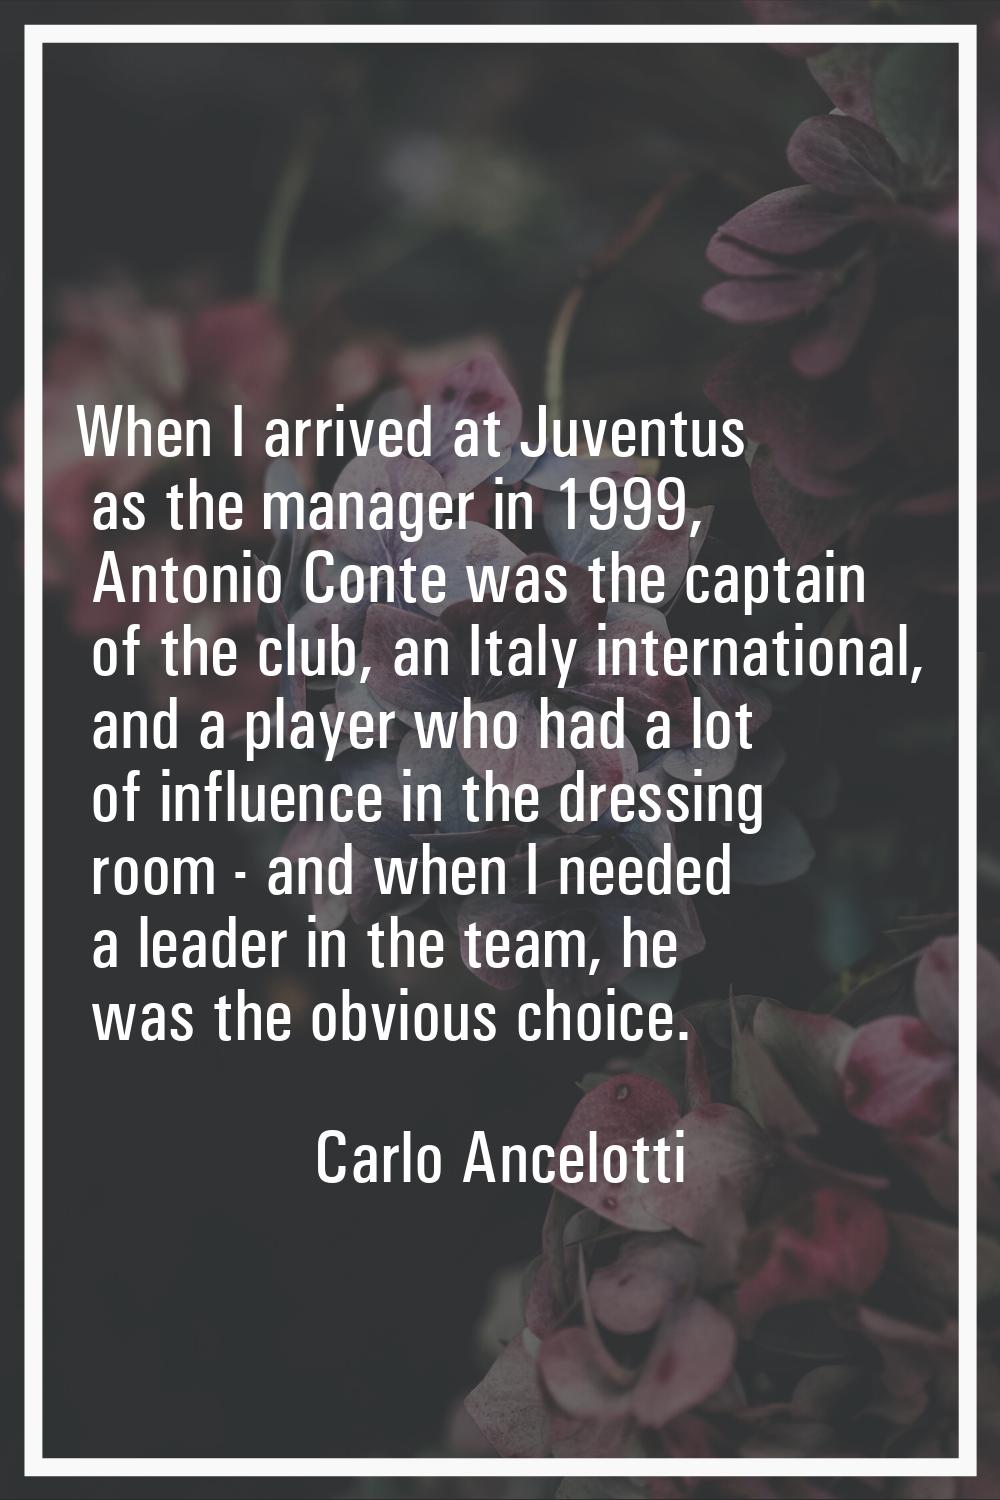 When I arrived at Juventus as the manager in 1999, Antonio Conte was the captain of the club, an It